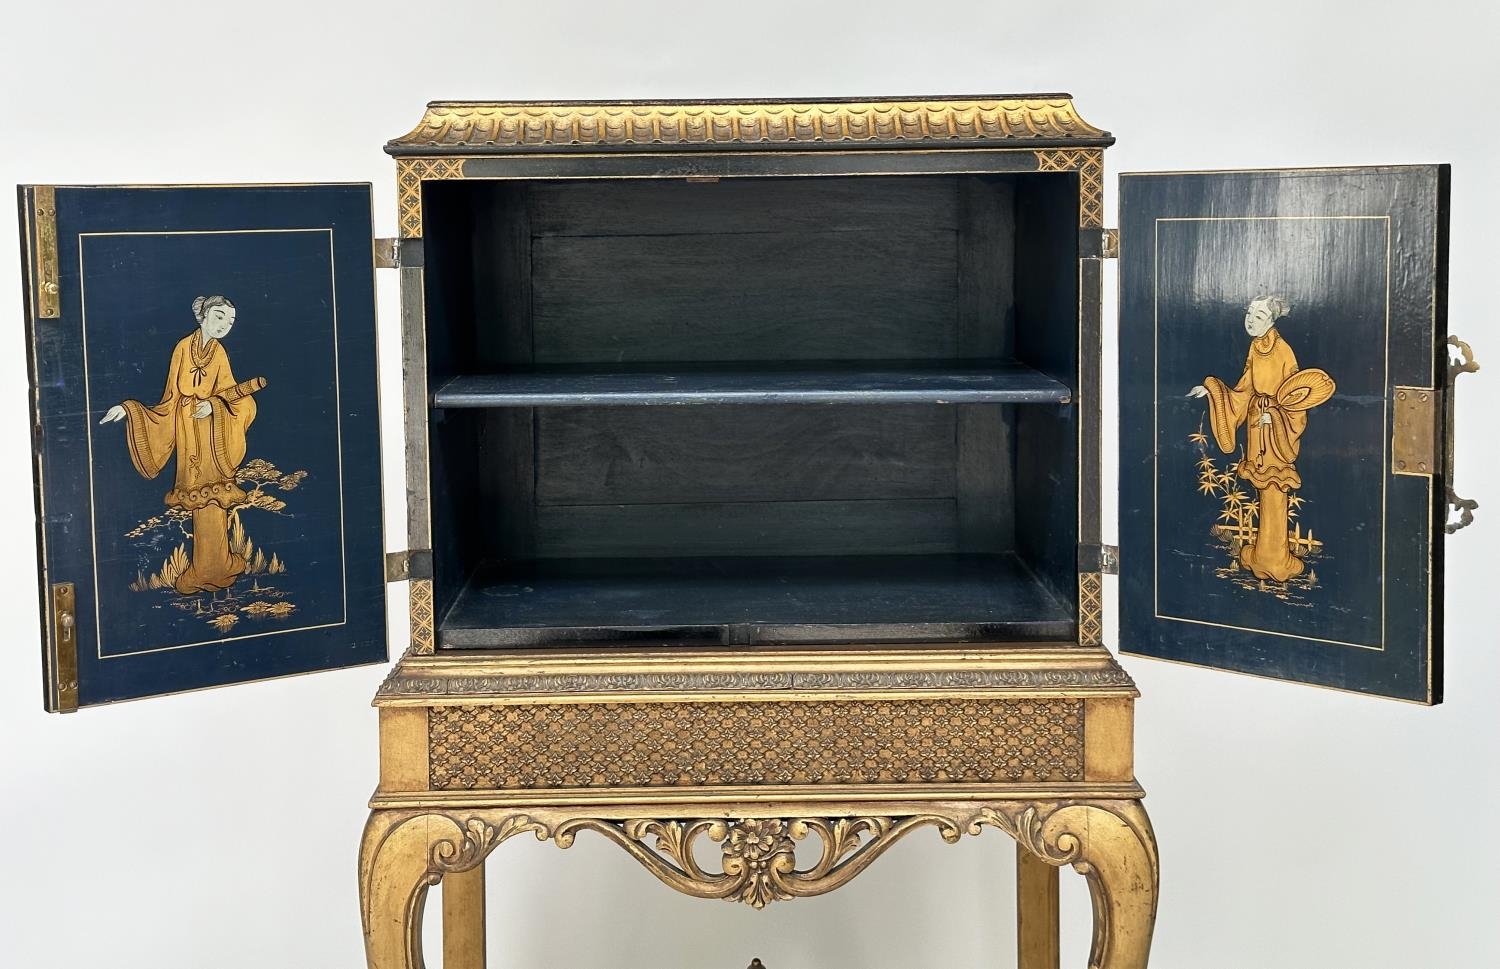 CABINET ON STAND, early 20th century English lacquered and gilt chinoiserie decorated, silvered - Image 7 of 11